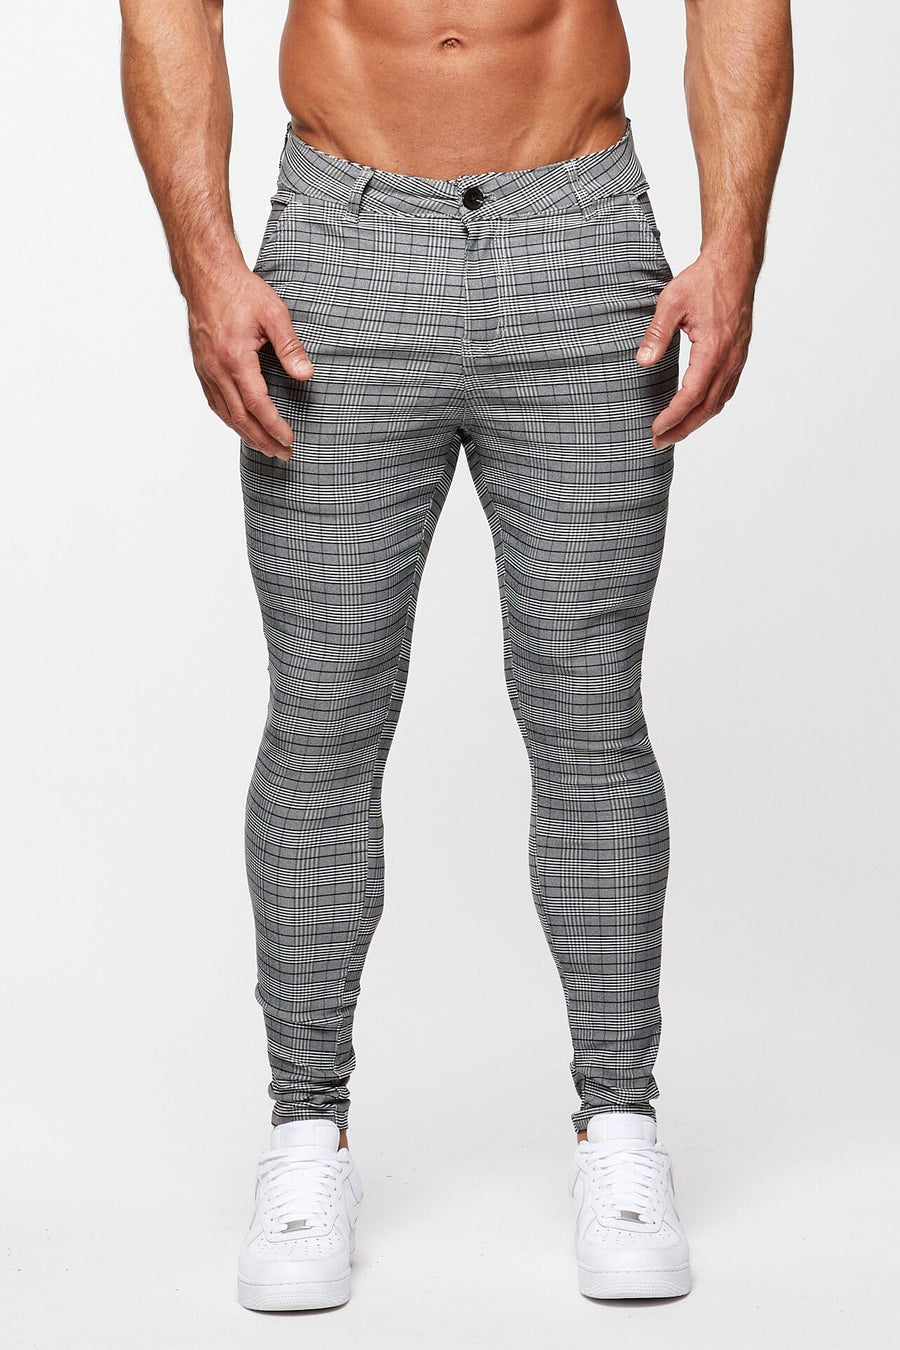 Legend London Trousers MICRO CHECK TROUSERS - GREY